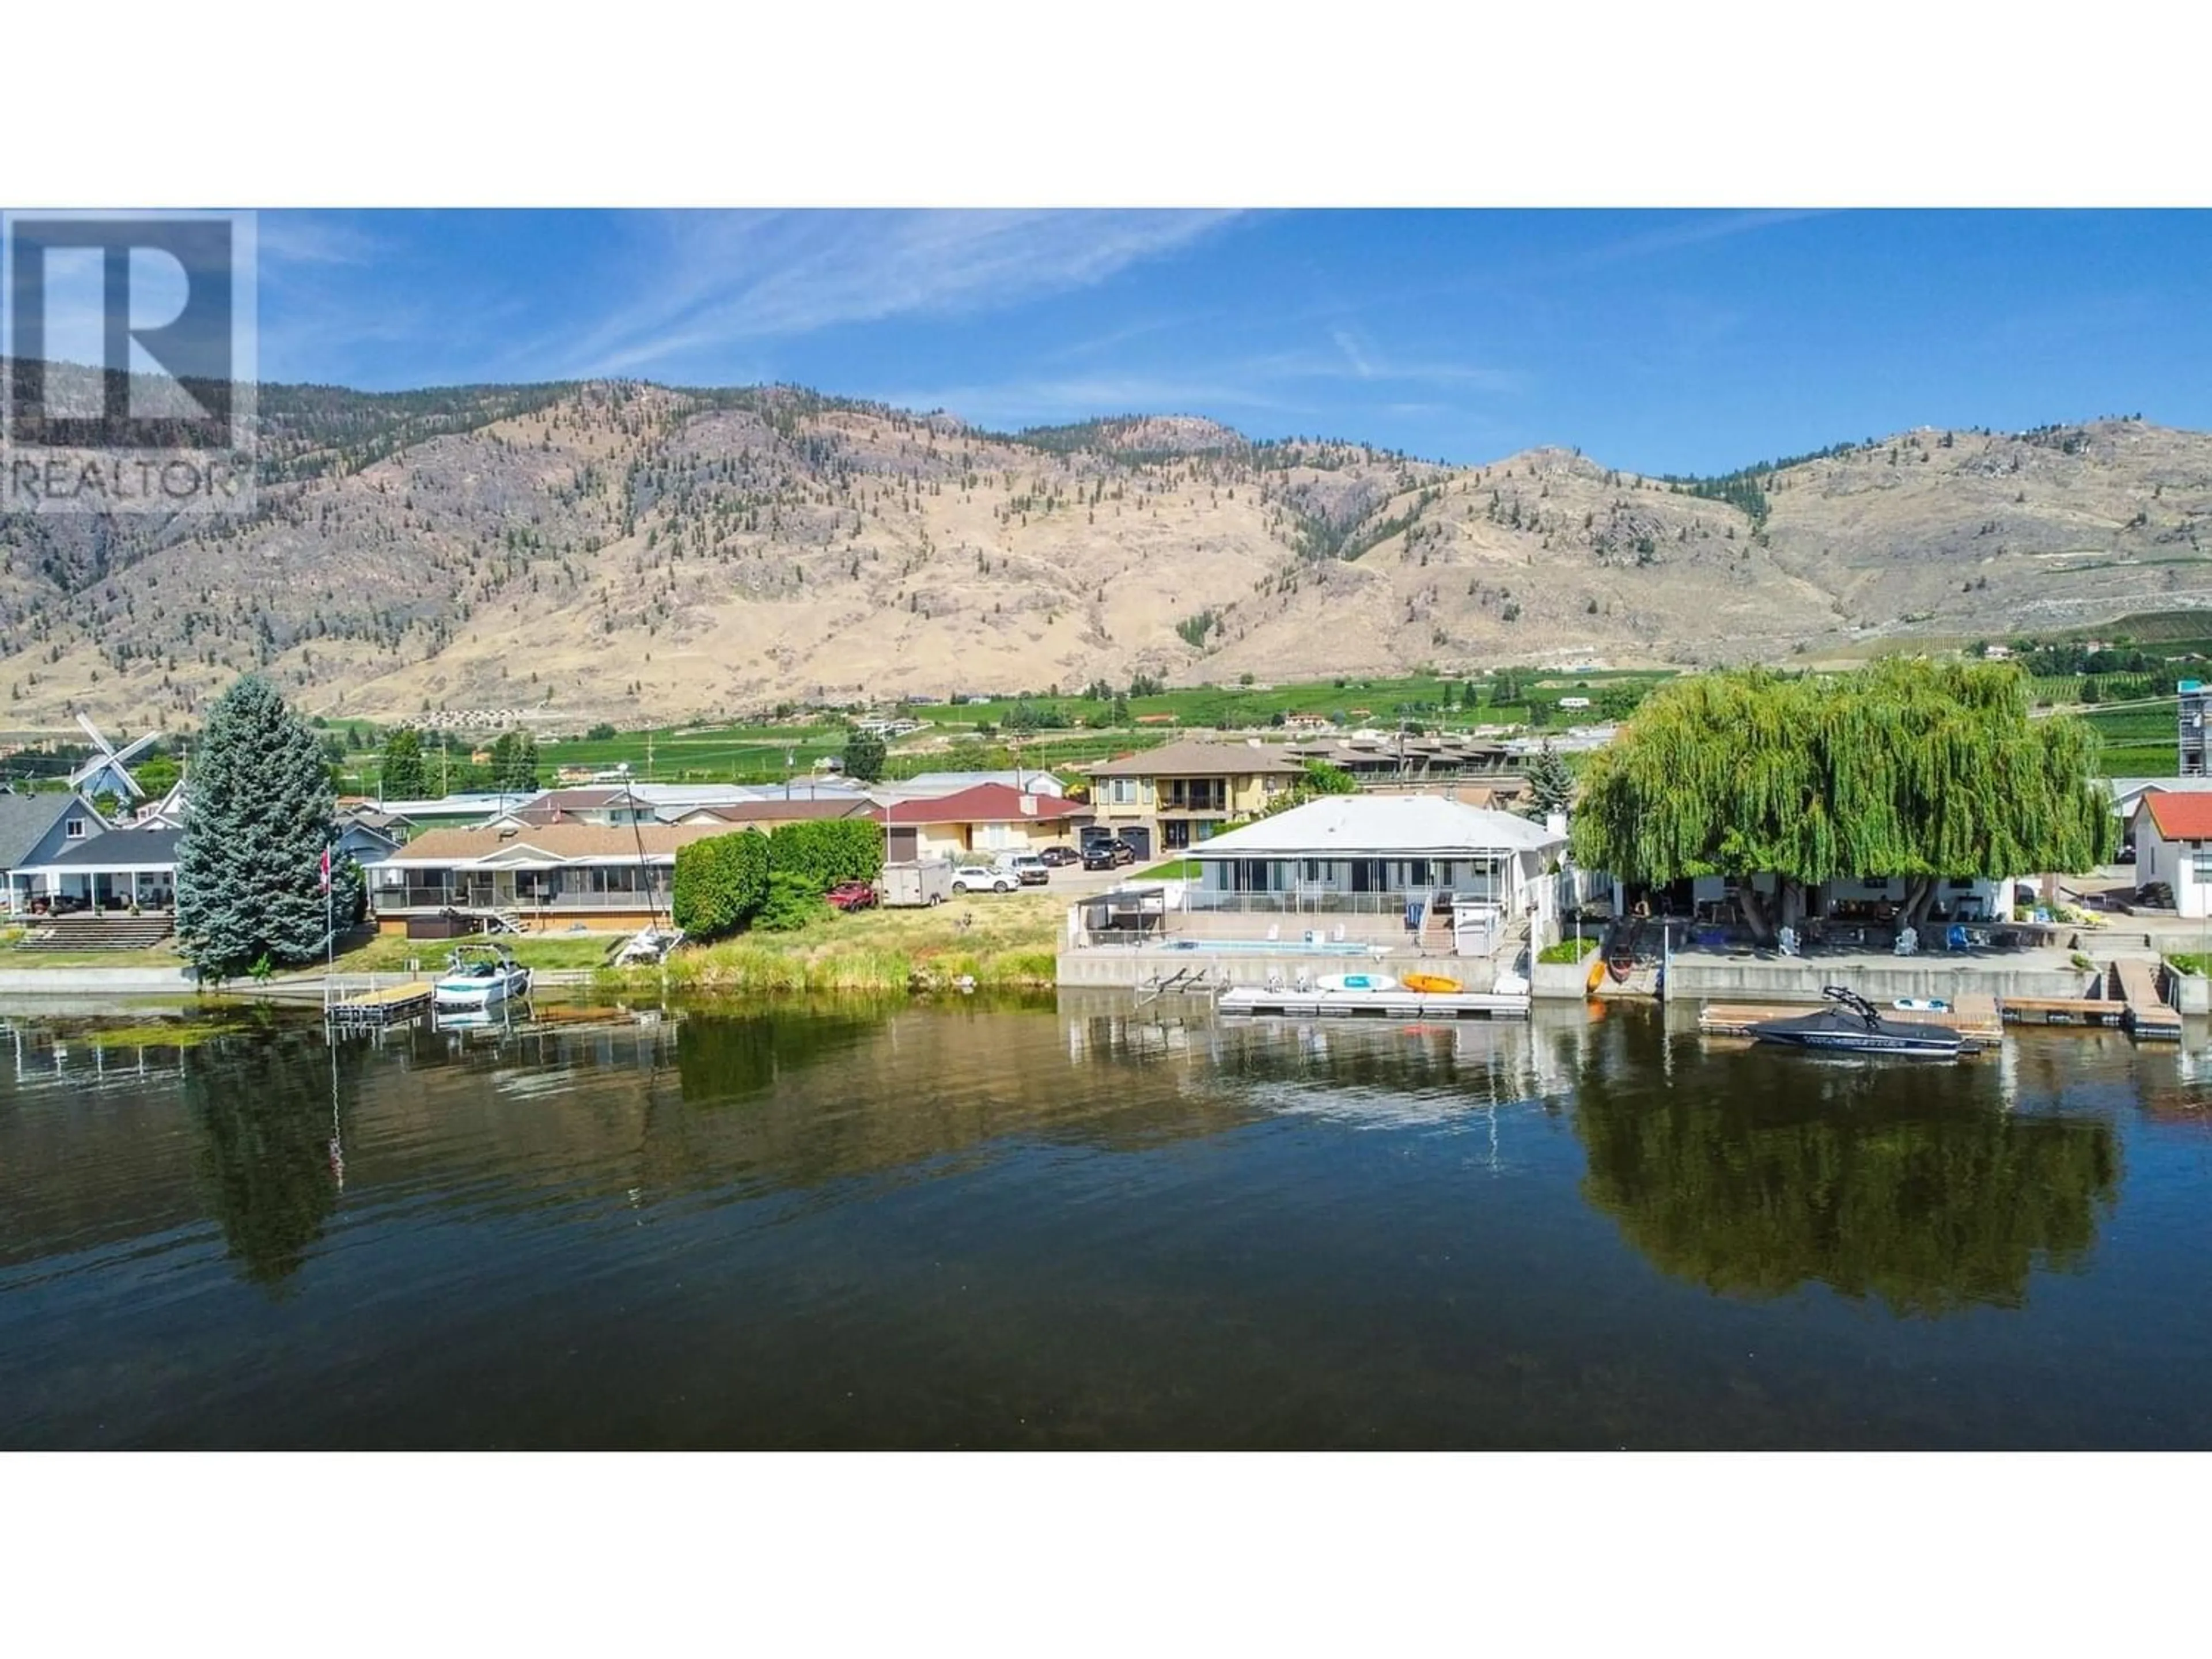 Lakeview for 32 BAYVIEW Crescent, Osoyoos British Columbia V0H1V6